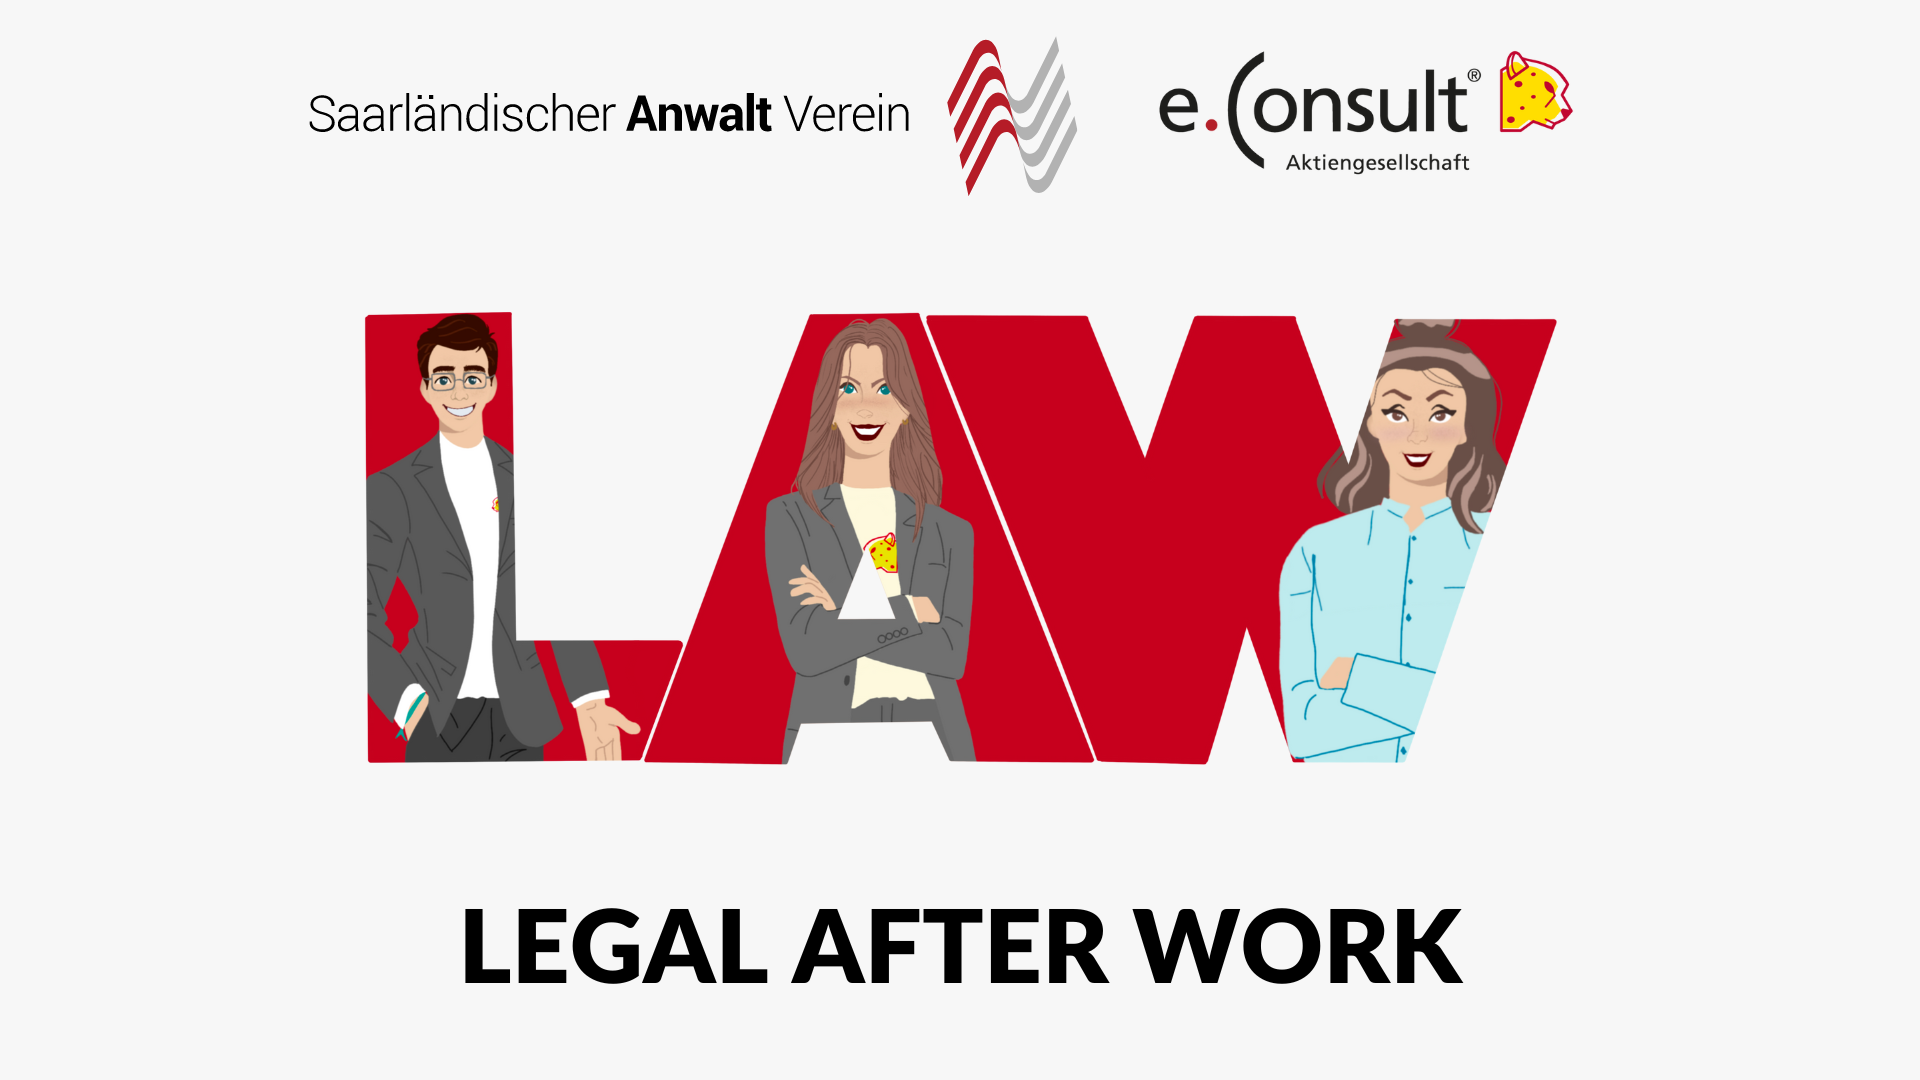 LAW - Legal after Work - e.Consult AG + Saarl. Anwaltsverein